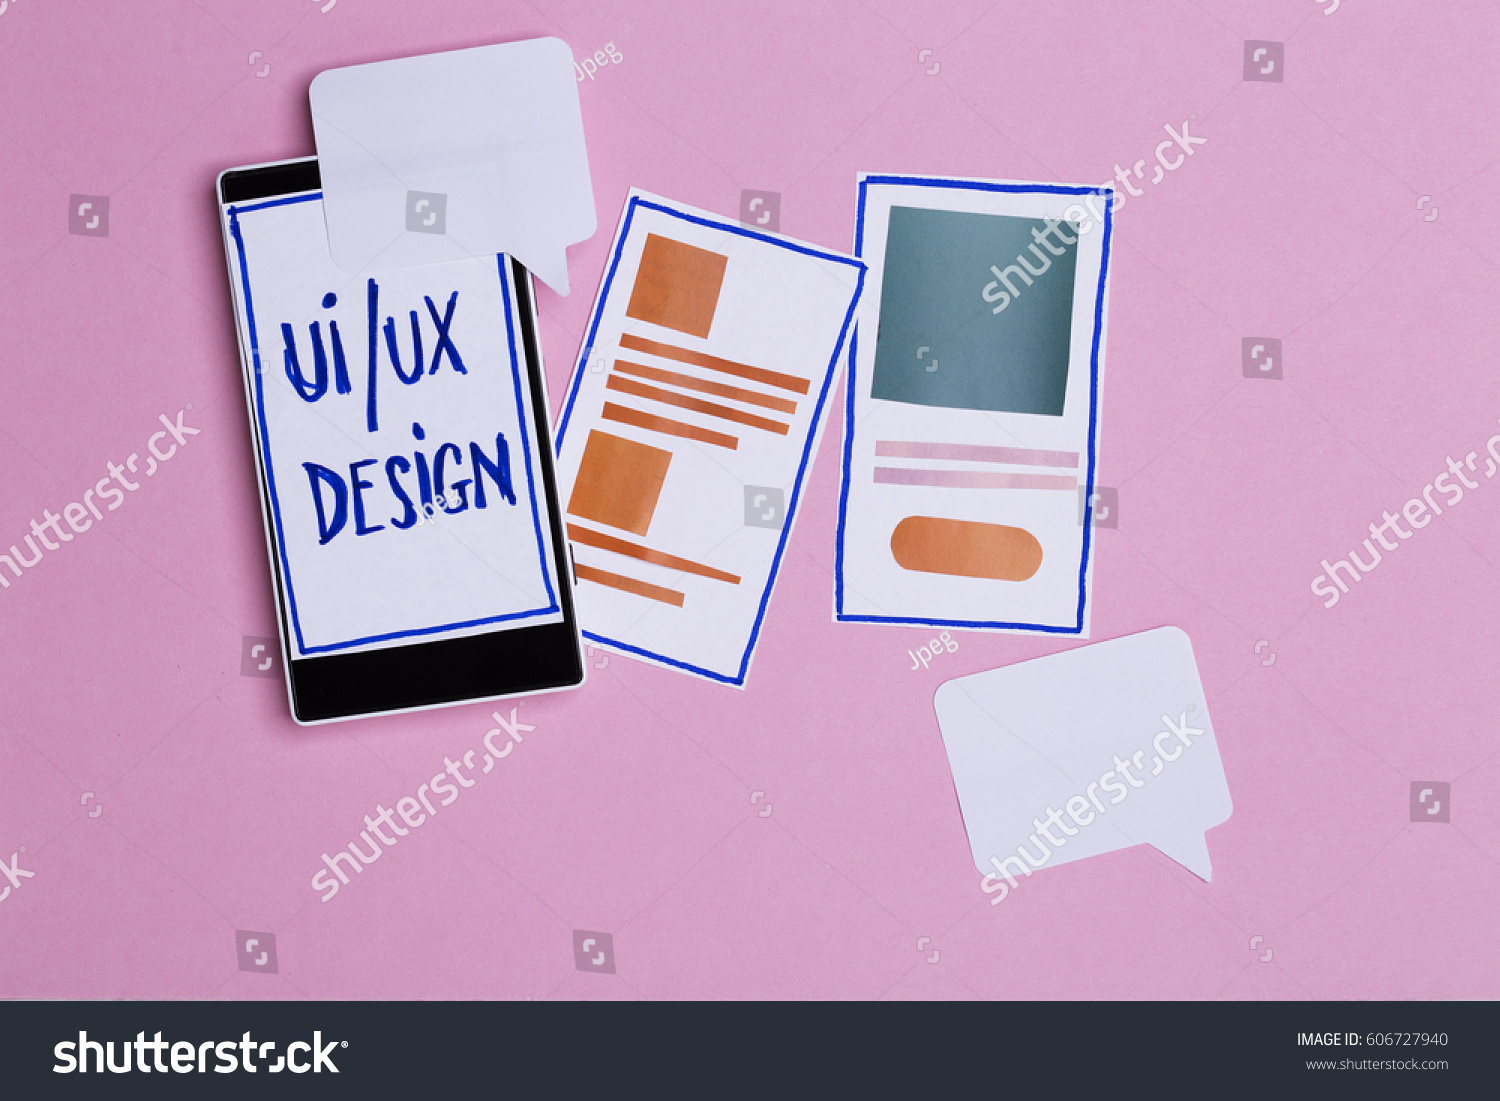 User interface and user experience design process, UI/UX. Composition with smart phone and design elements for mobile website #606727940